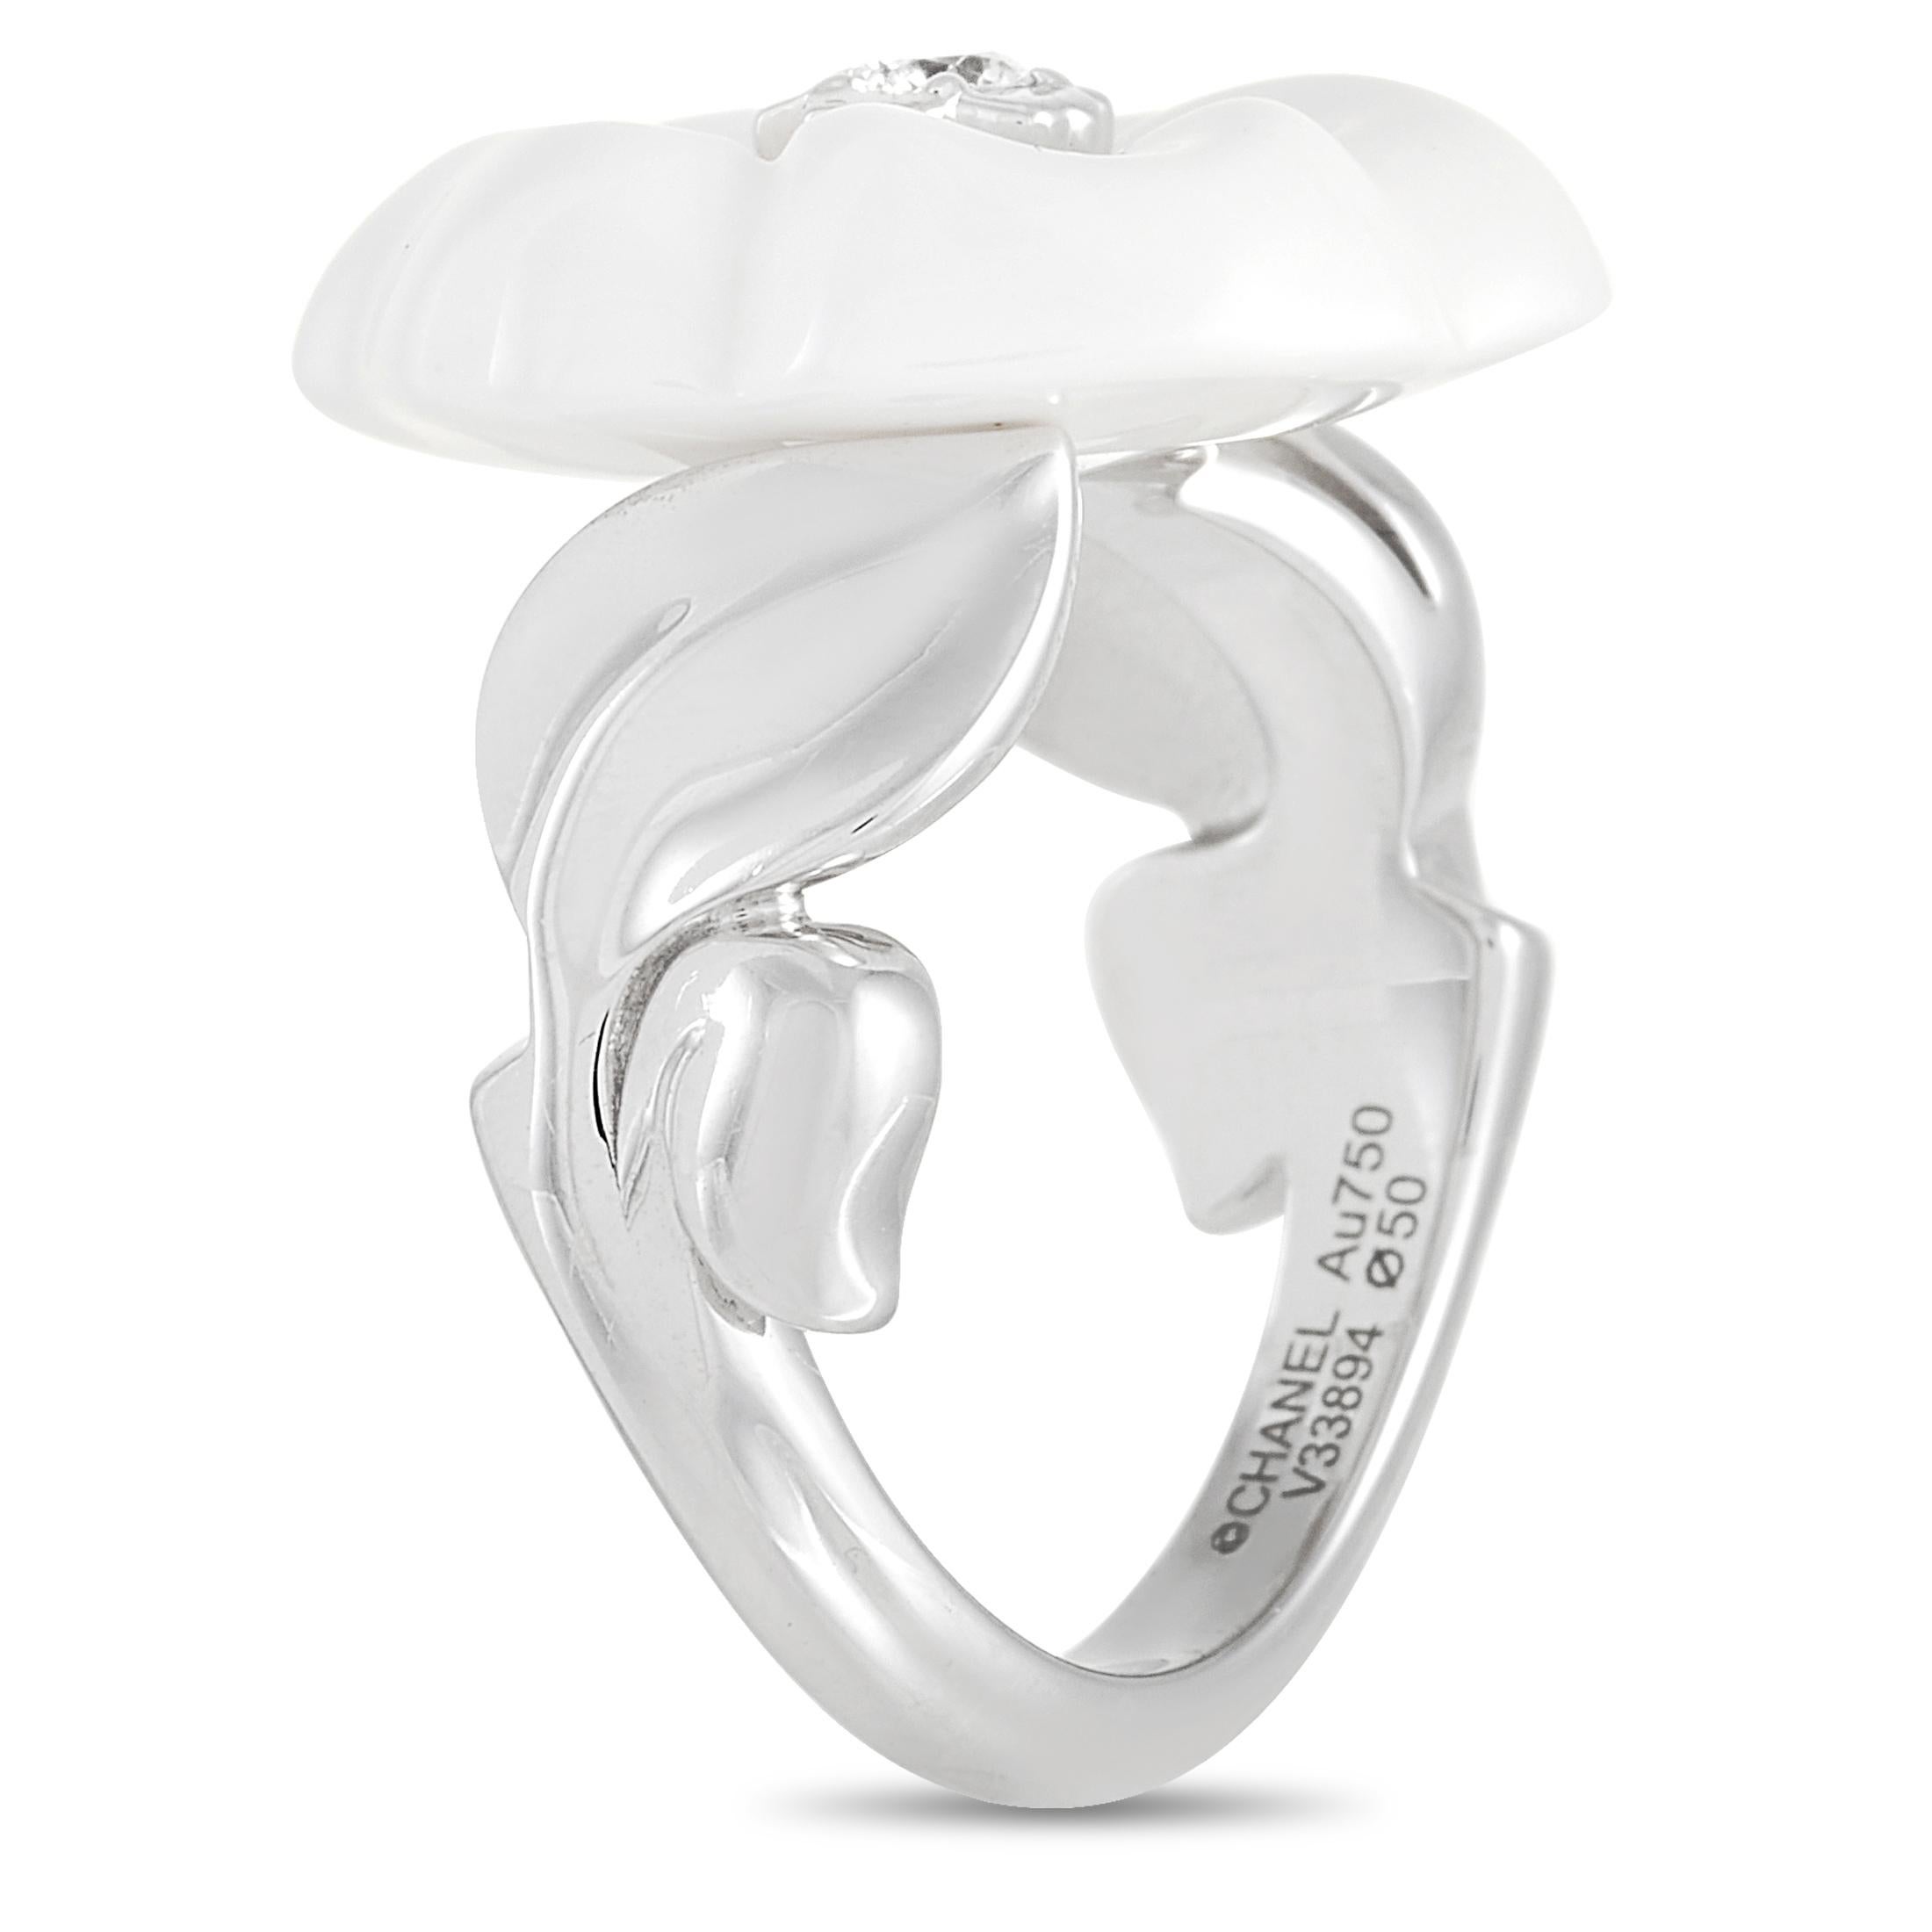 This pretty Chanel 18K White Gold Ceramic Diamond Flower Ring is made with 18K White Gold forming a band with leaves that highlights a white ceramic flower set with a single round-cut diamond in the center. The ring has a band thickness of 3 mm, a